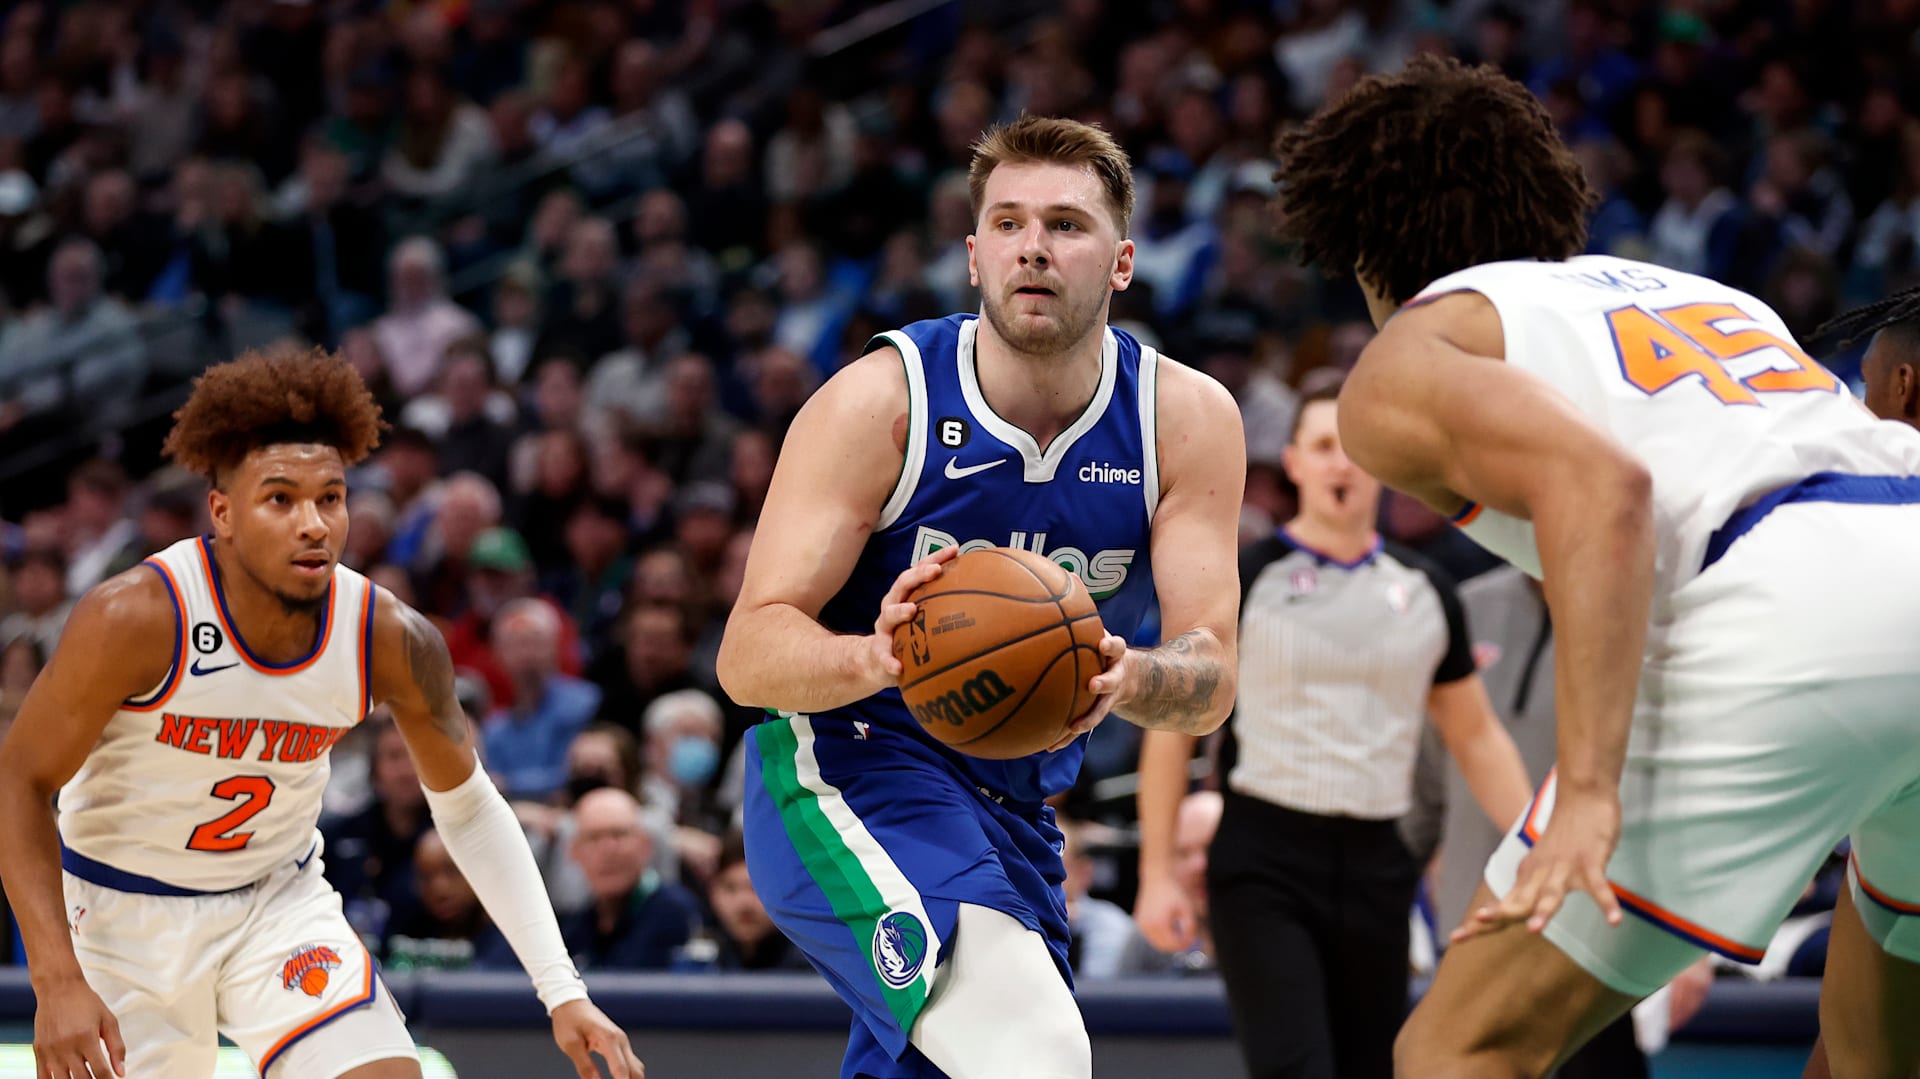 Luka Doncic Career NBA All-Star Game Stats and Record